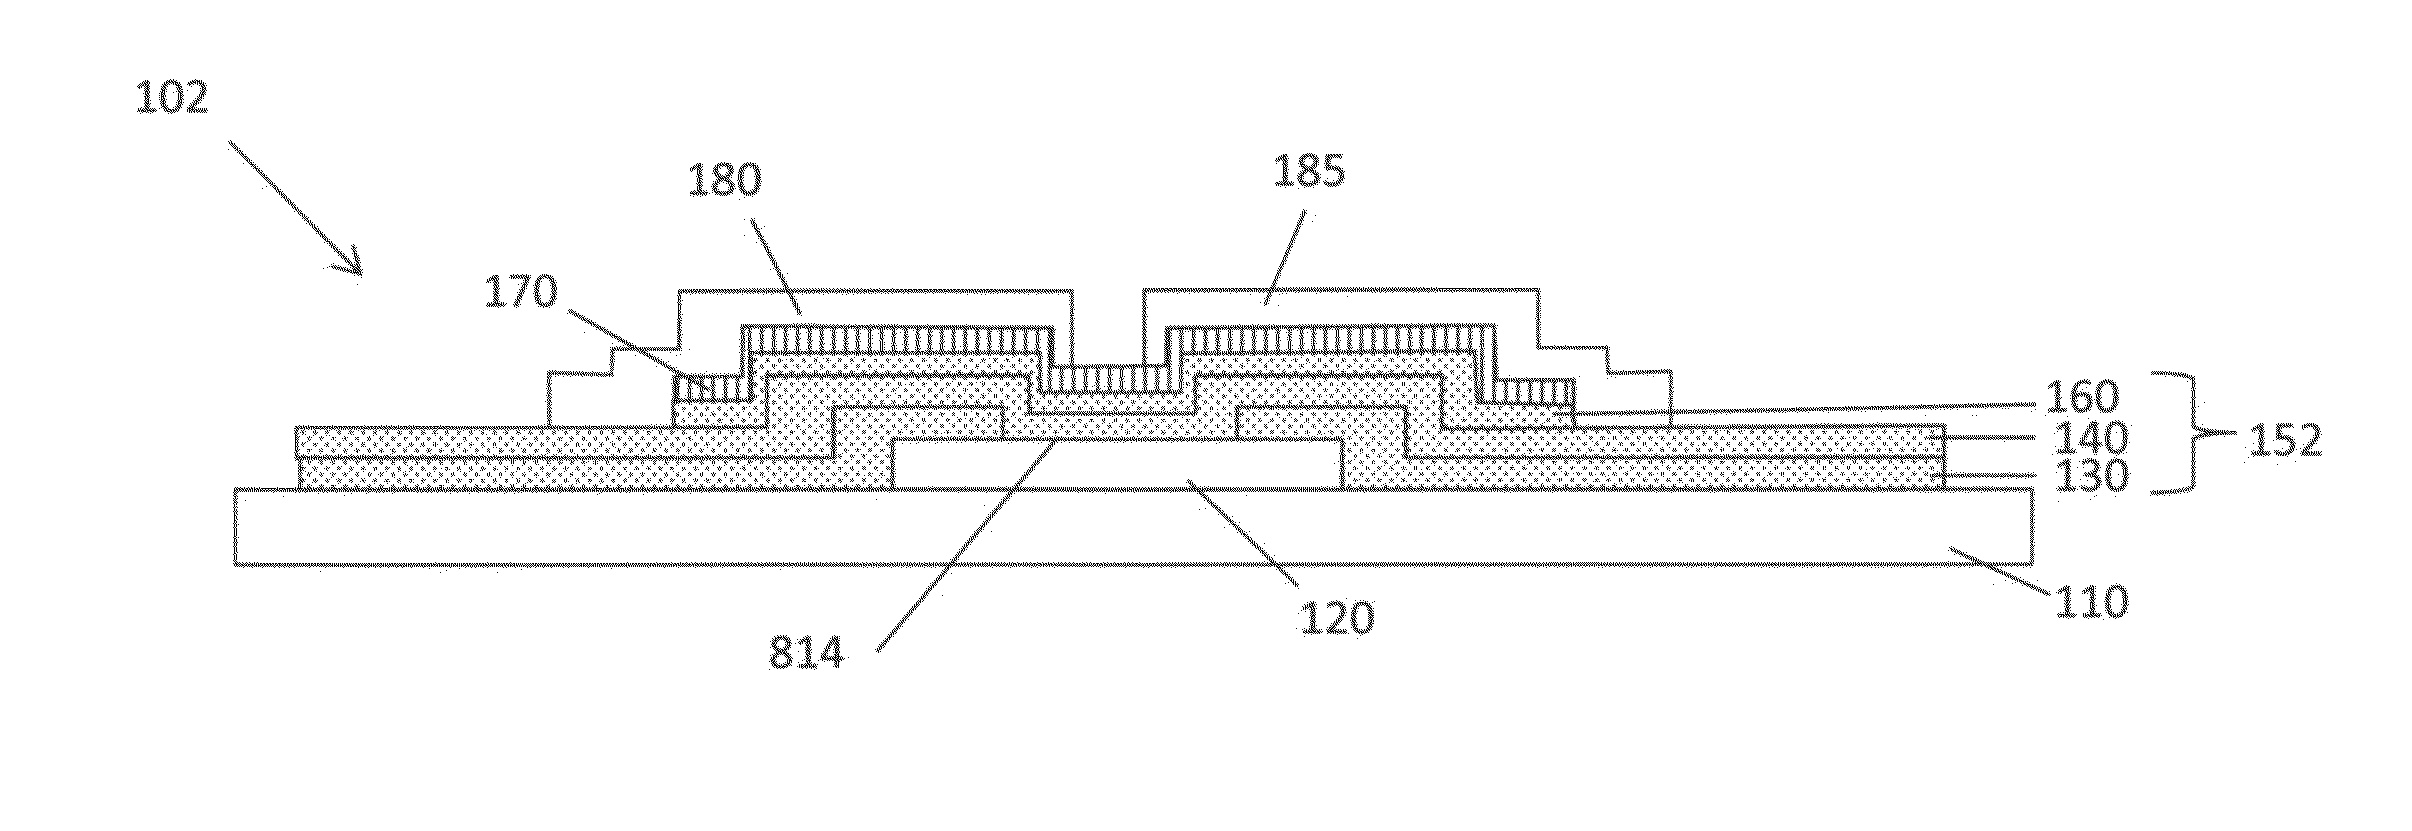 Method for forming a variable thickness dielectric stack